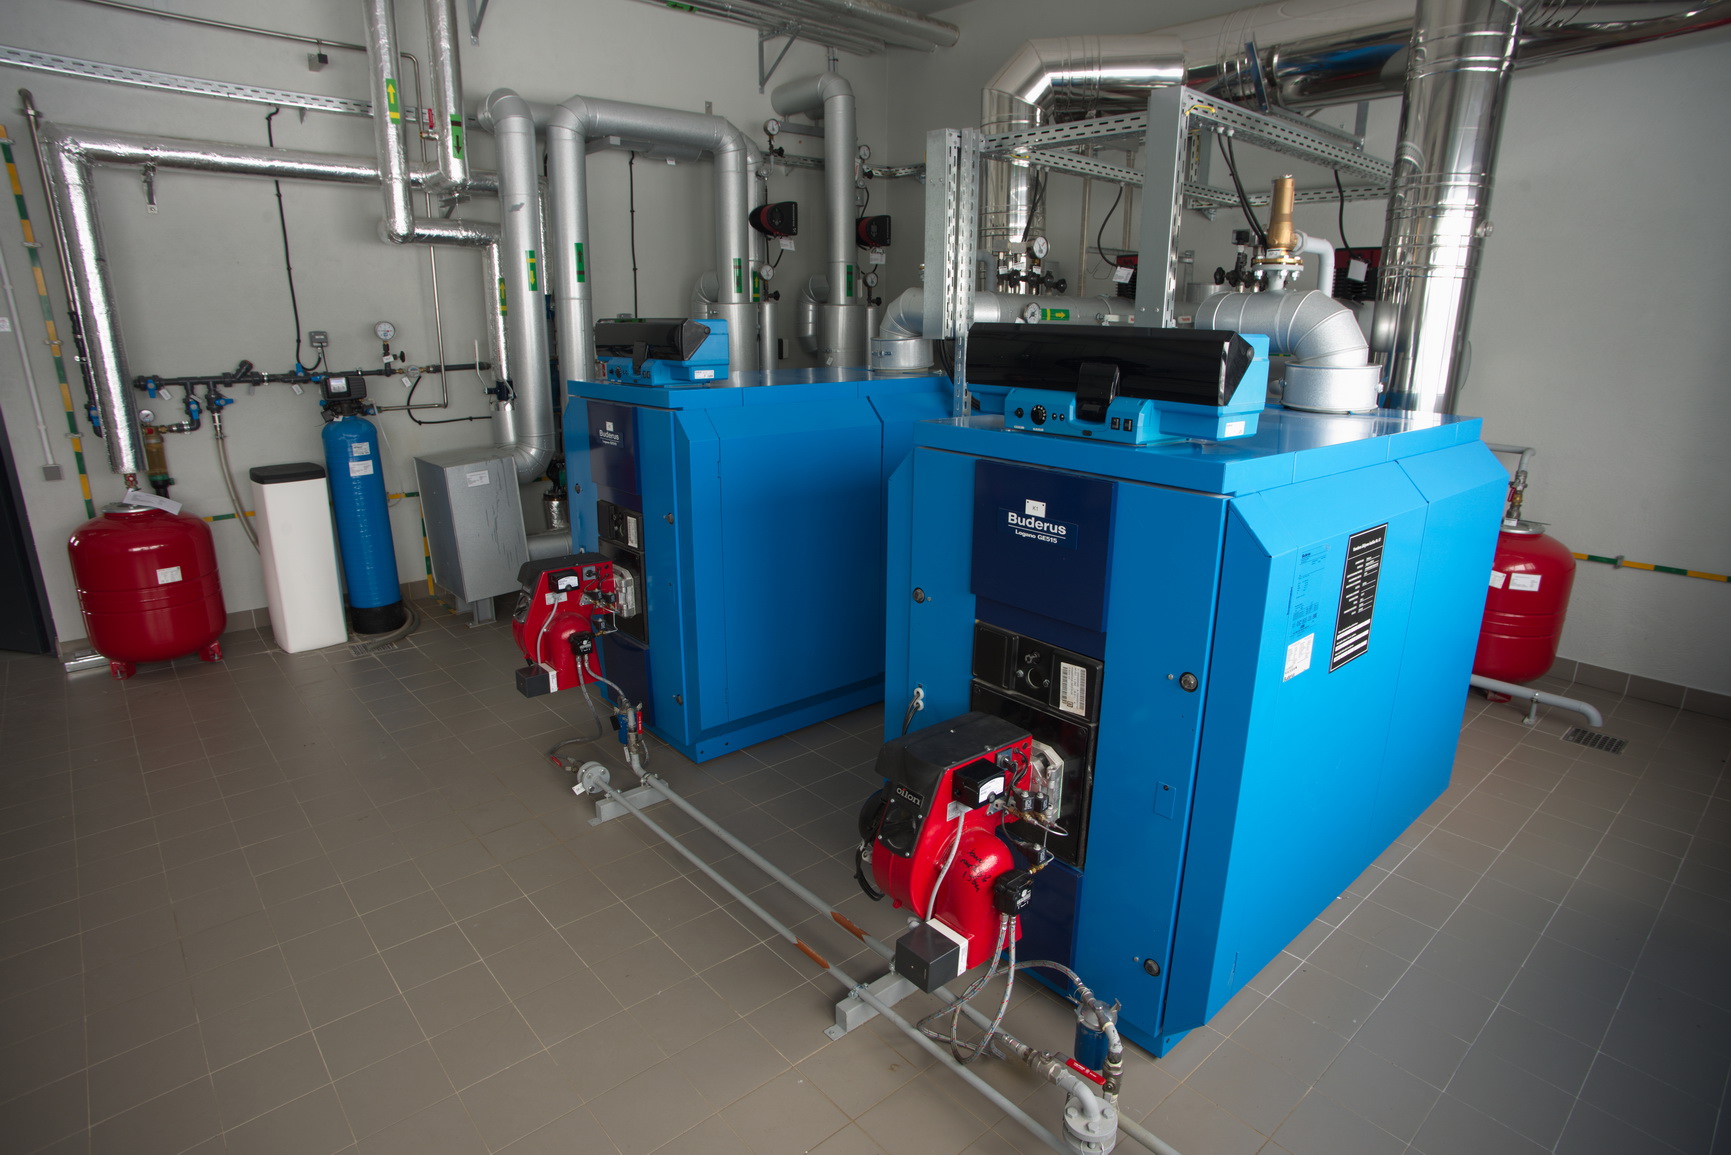 Boiler house solution with 2×295 kW hot water boilers for mineral water producer